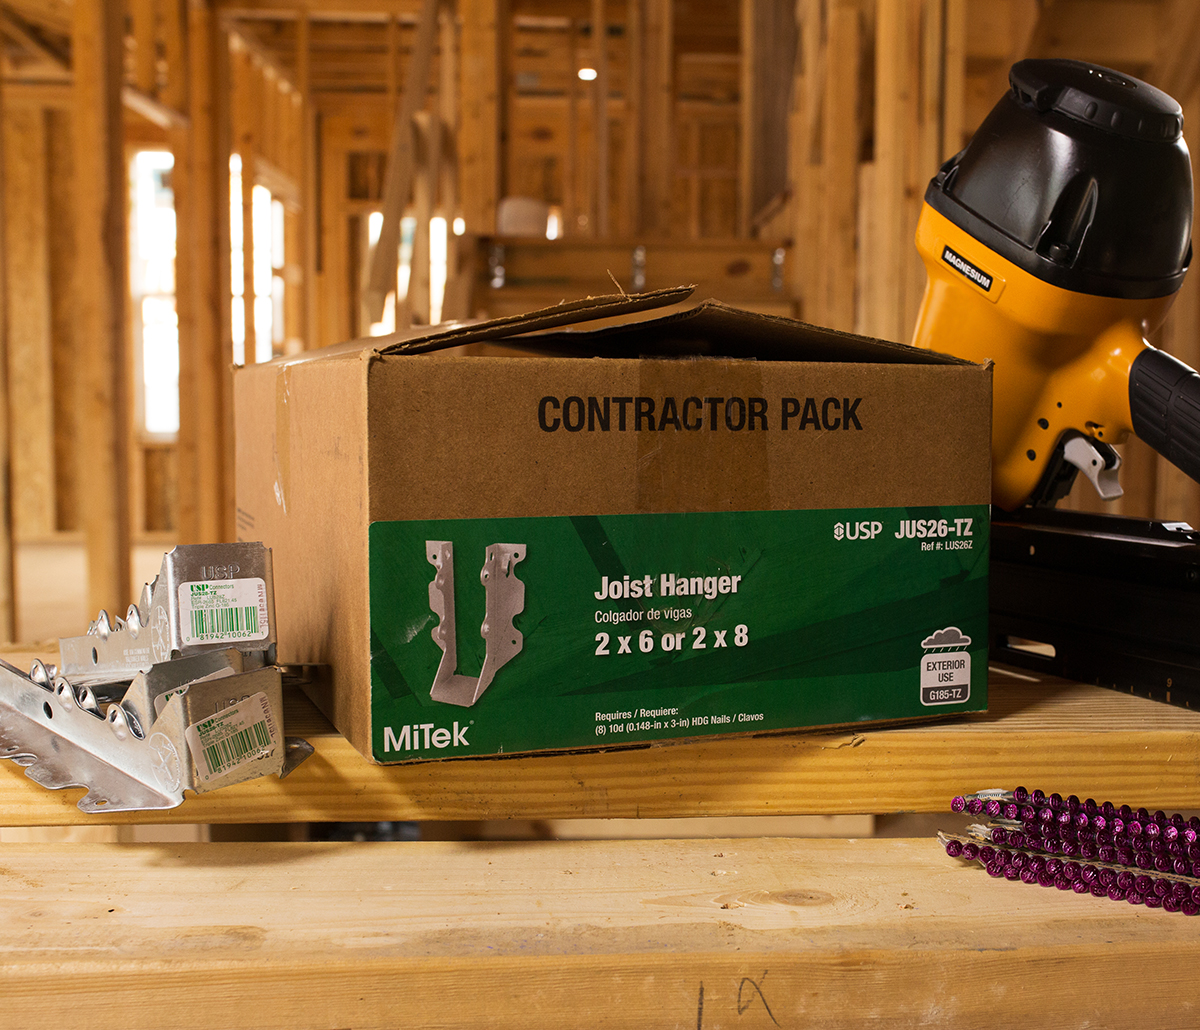 MiTek Connector Engineered Systems Products - Joist hangers and box of hangers at a jobsite